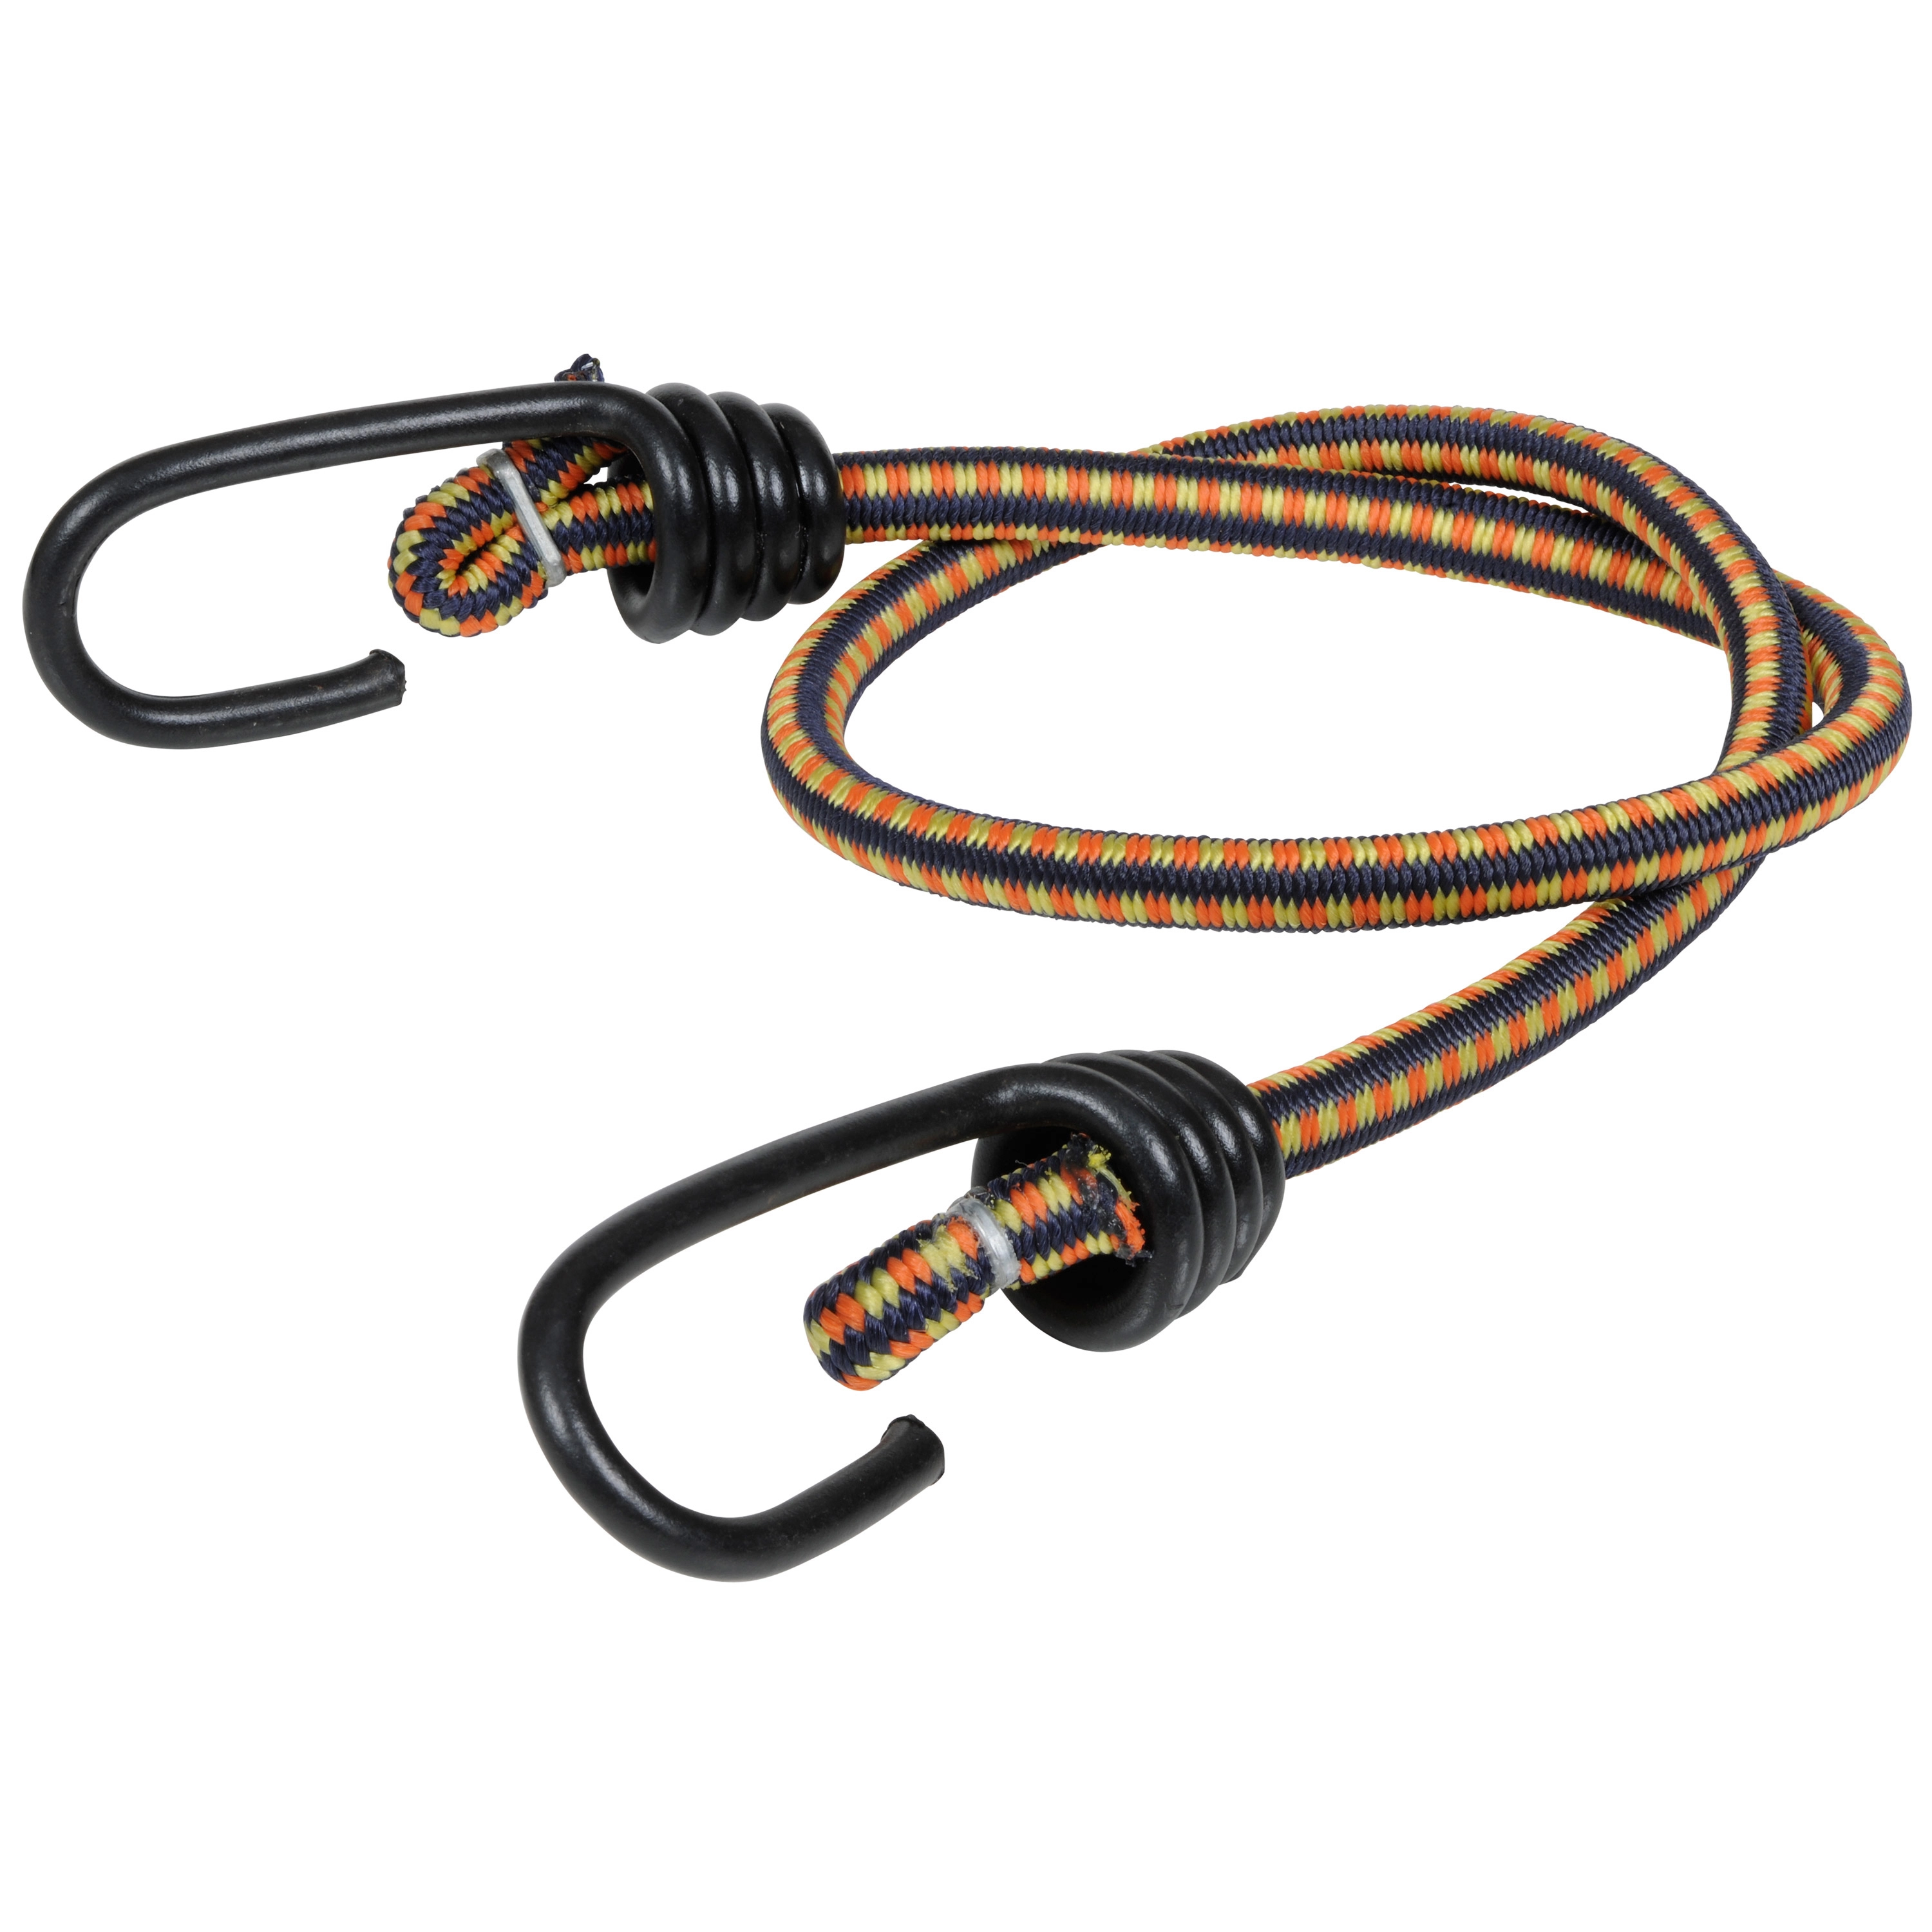 24" Bungee Cord with Coated Hooks variant image view